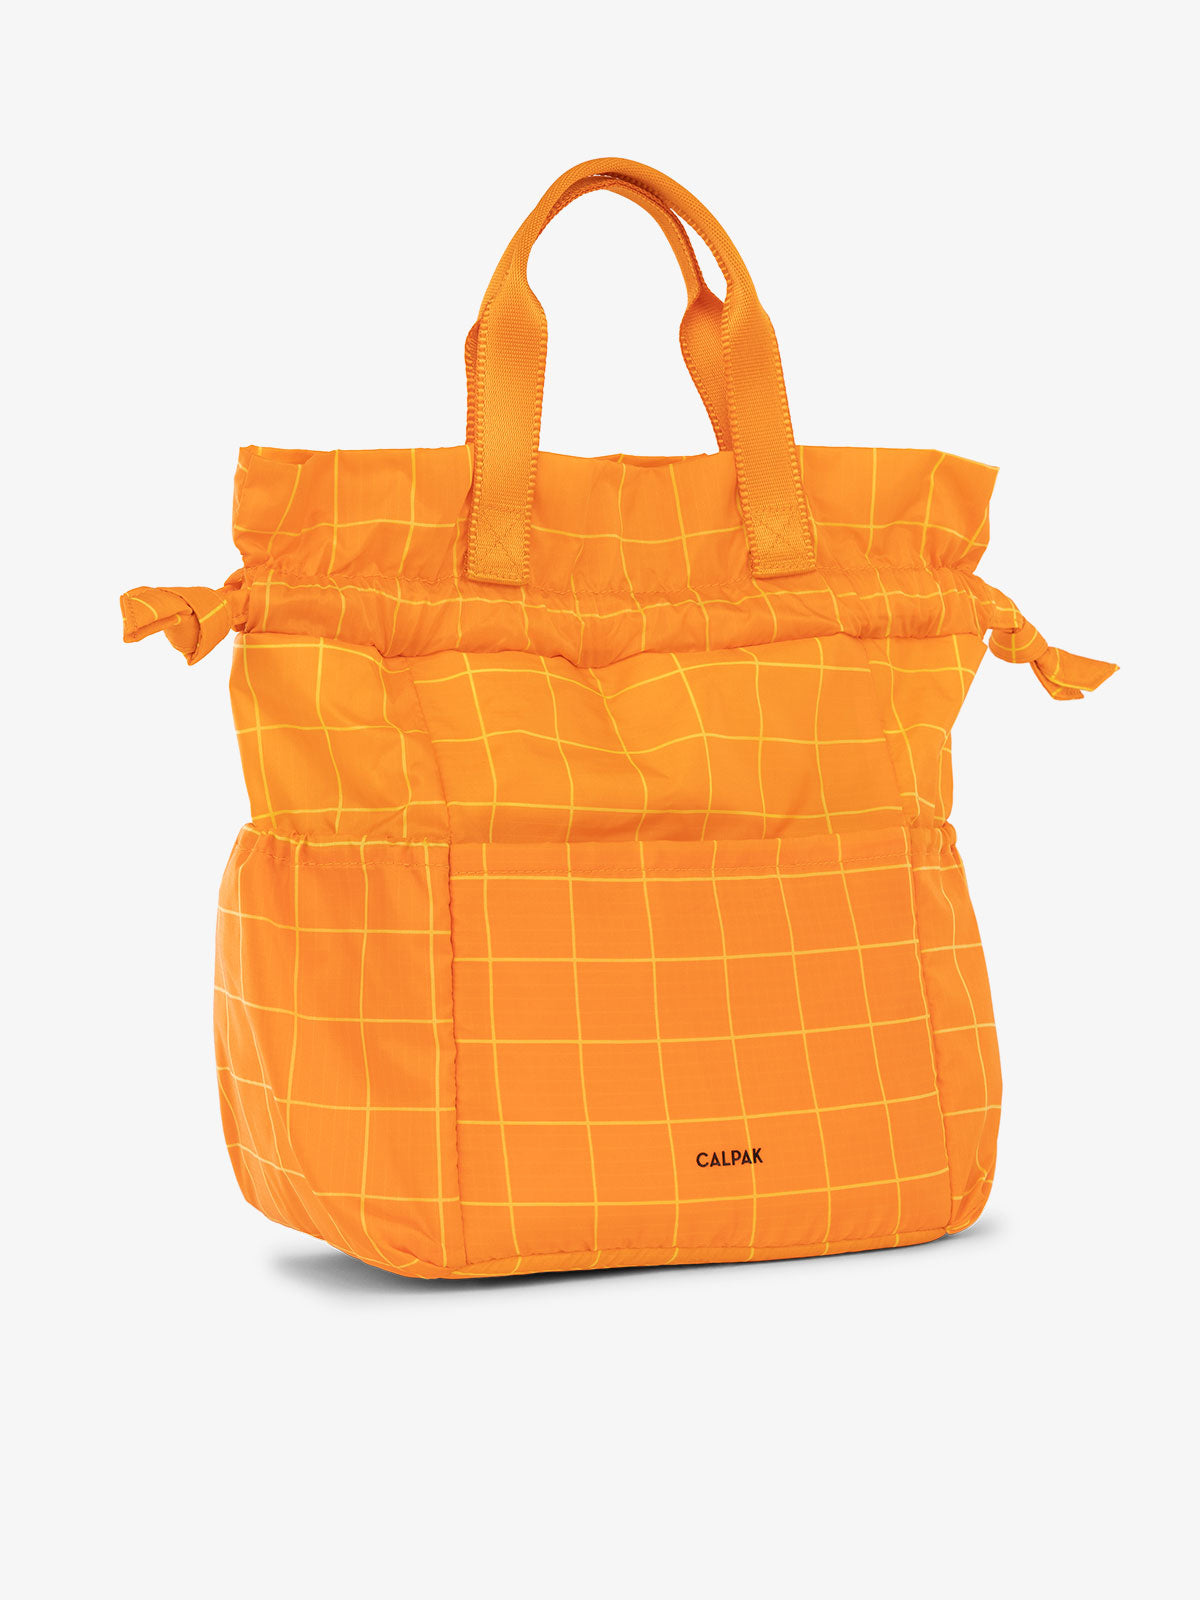 CALPAK Insulated Lunch Bag for men with multiple pockets and drawstring closure in orange grid